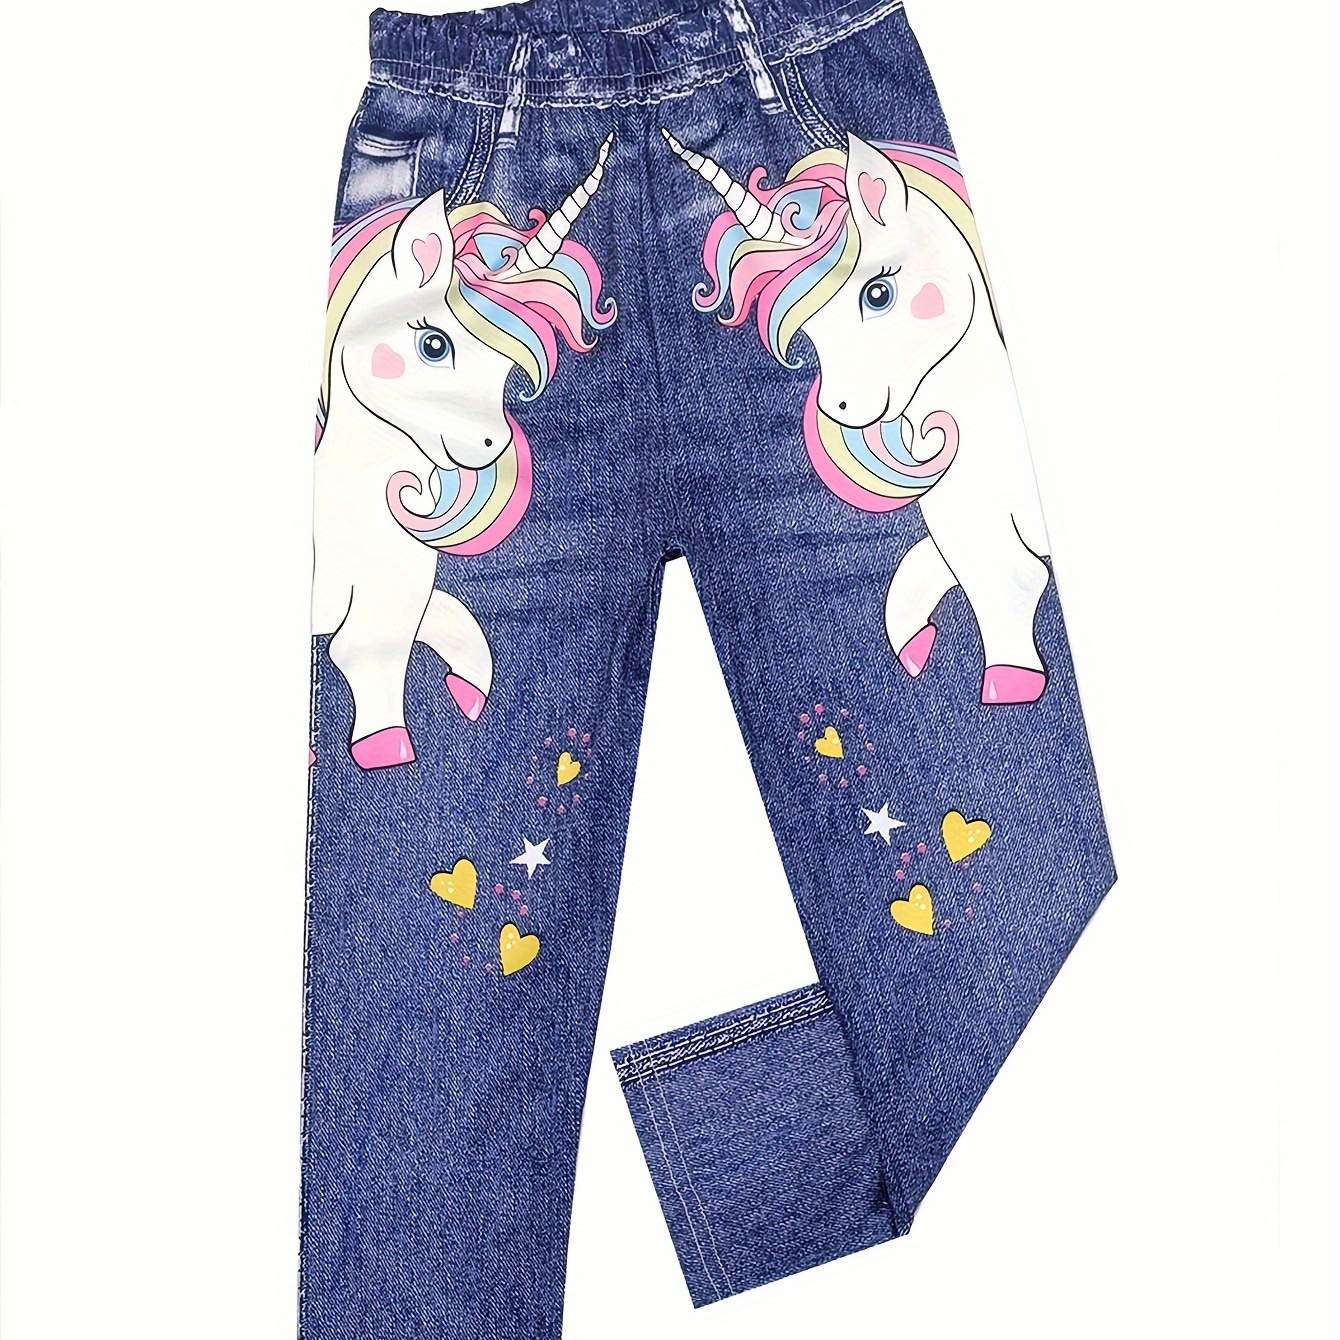 

Casual Unicorn Graphic Imitation Denim Print Leggings, Girls Stretchy Pants For Outdoor Gift